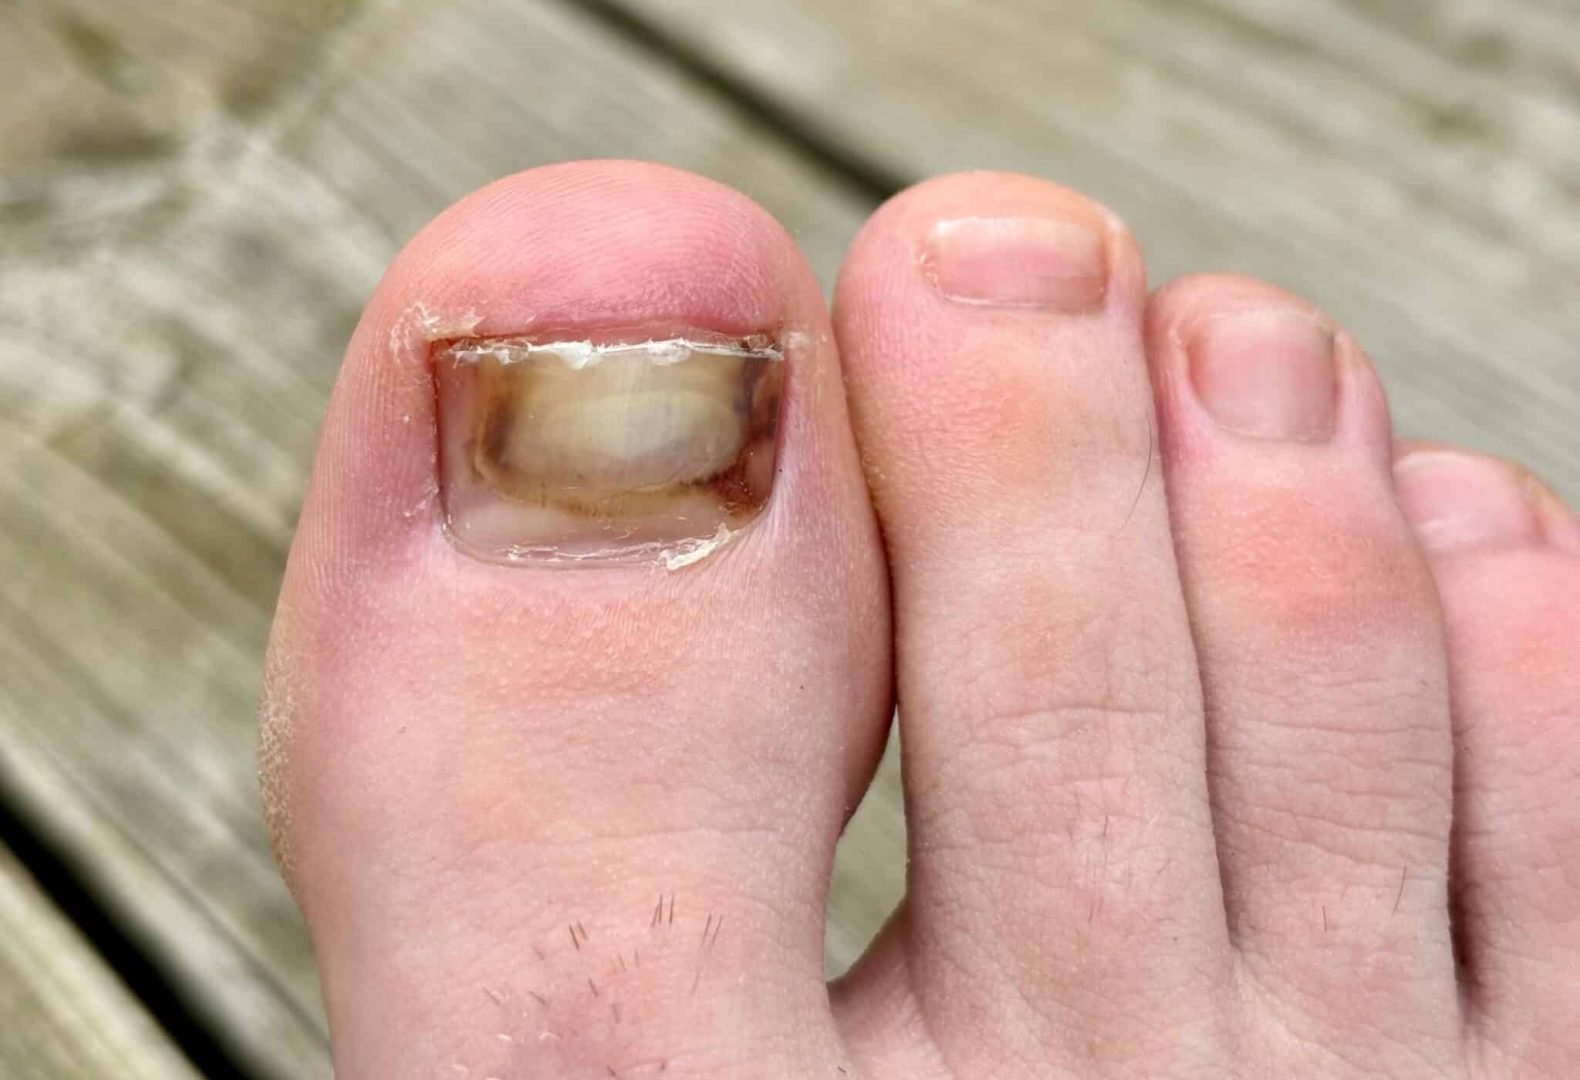 Tips For When Your Toenail Is on The Verge Of Falling Off